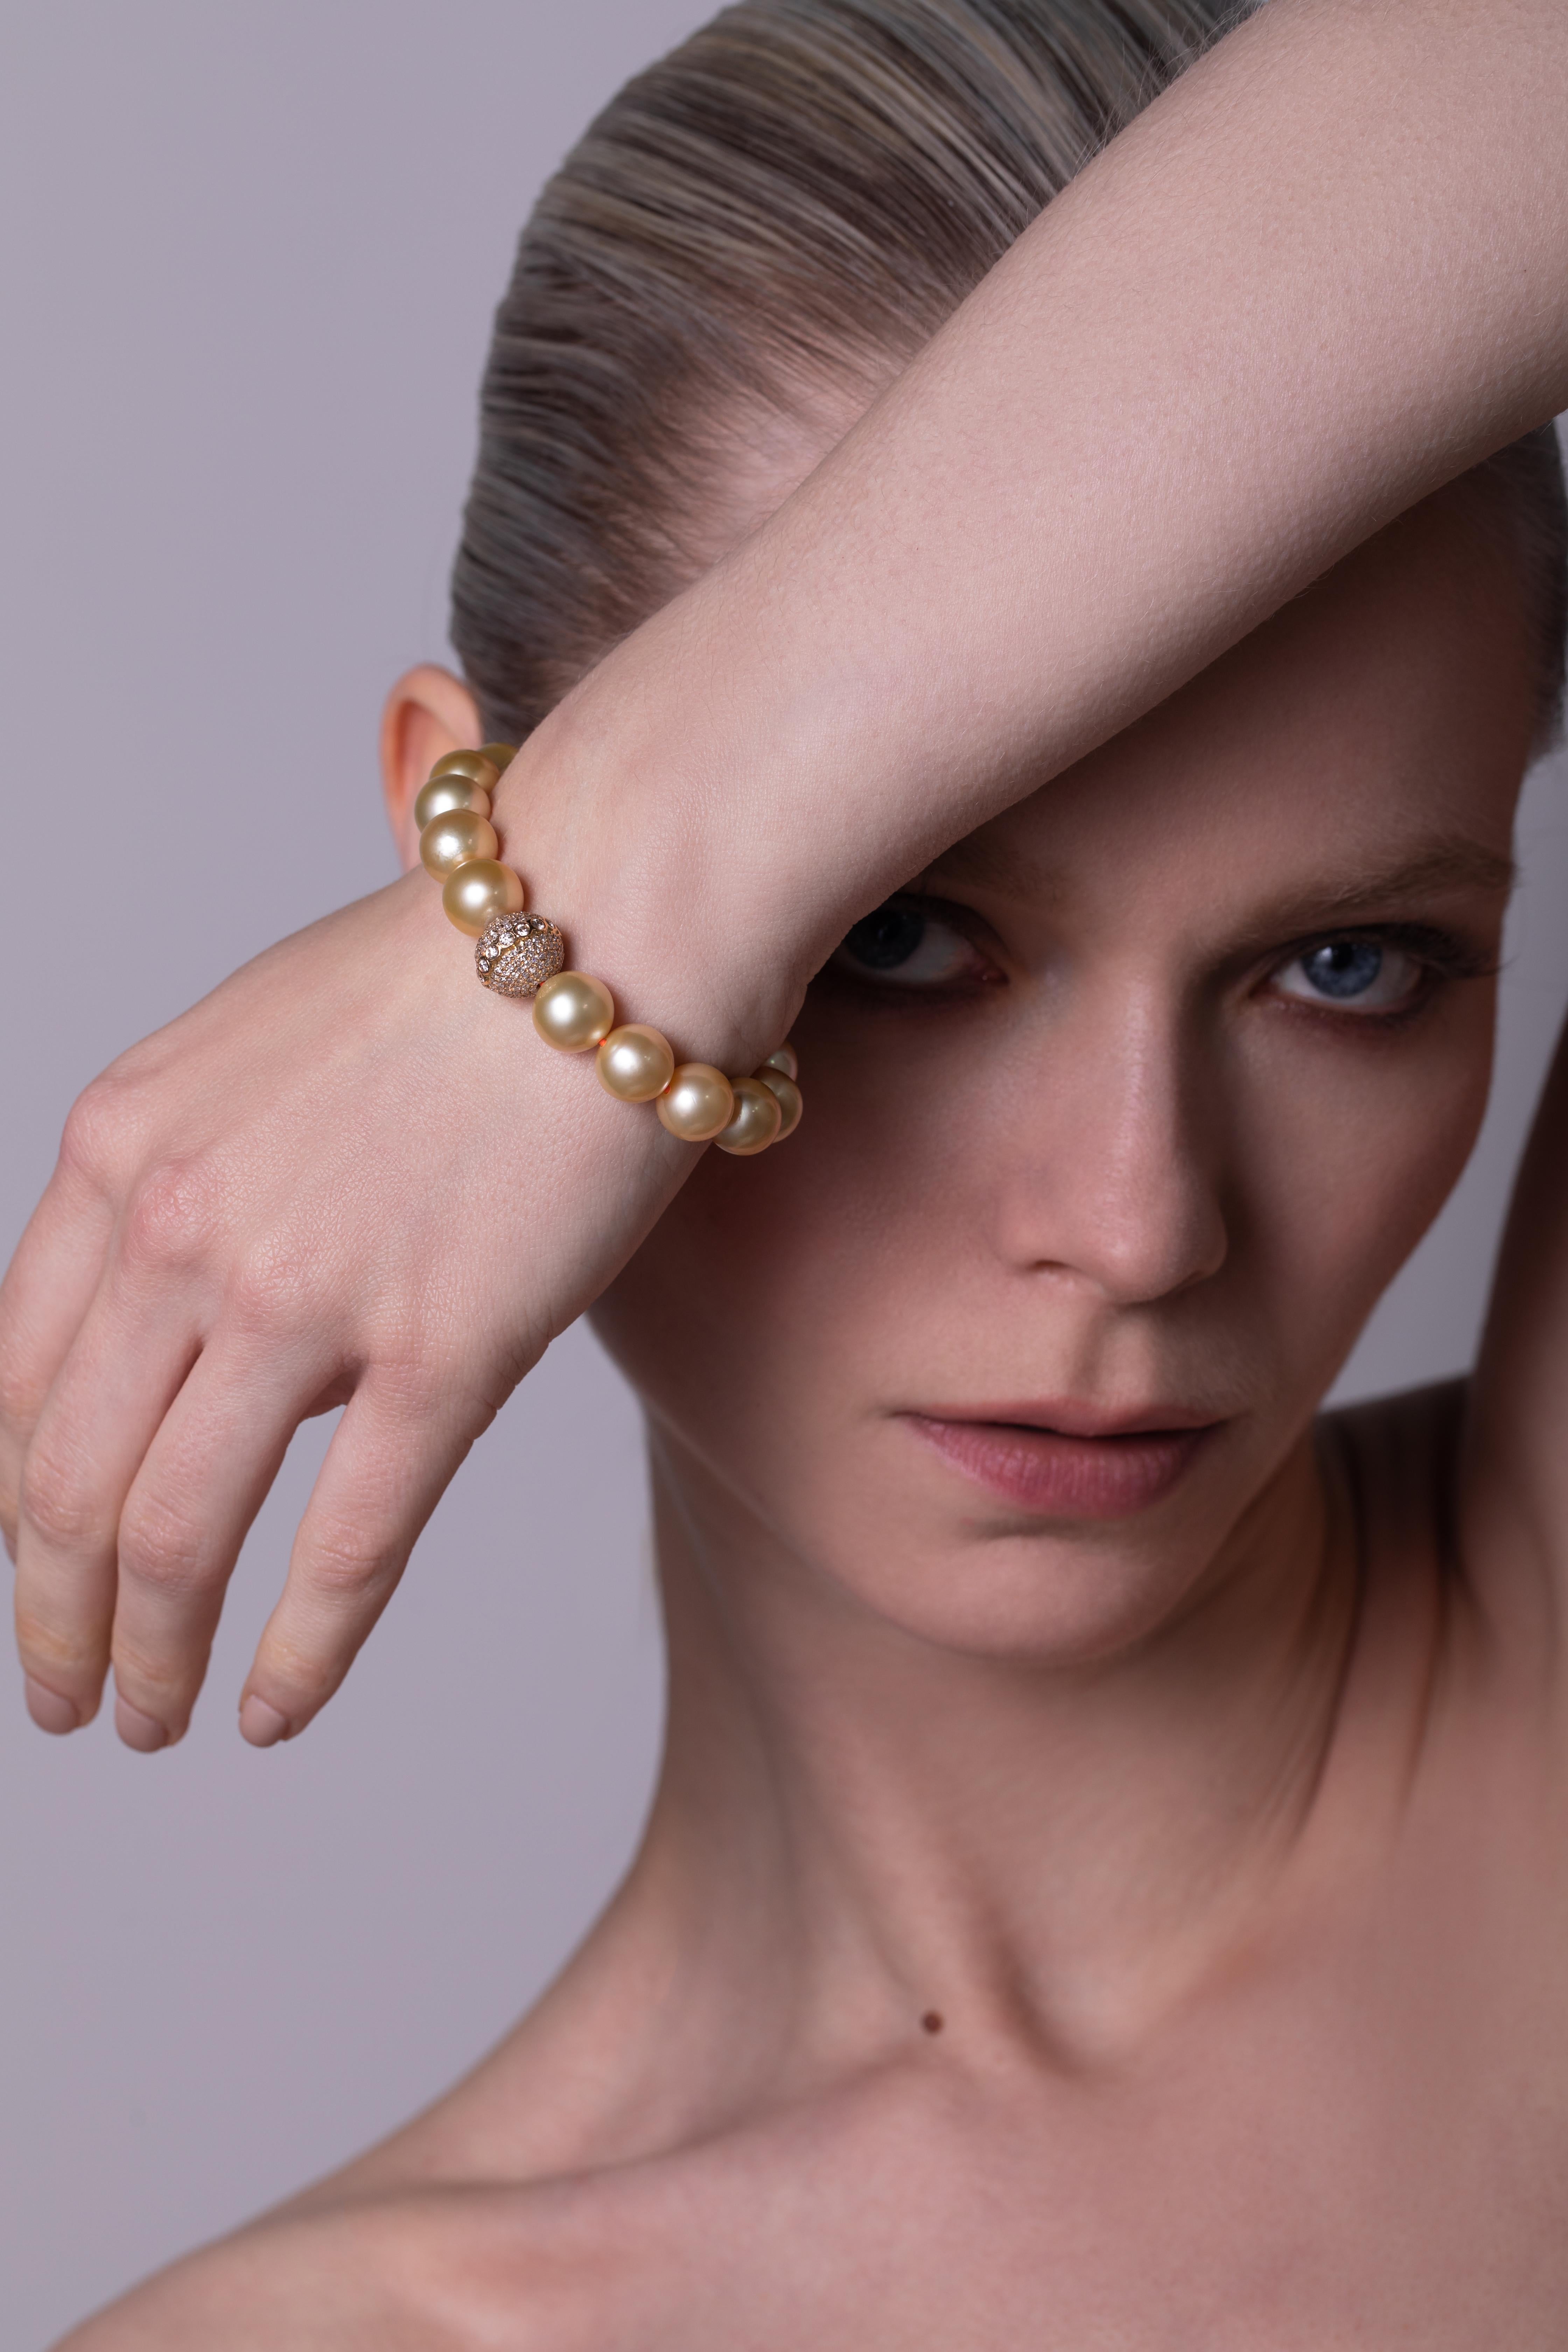 Brilliant Cut Golden South Sea Pearl Bracelet with 18k Yellow Gold Diamond Encrusted Orbs For Sale